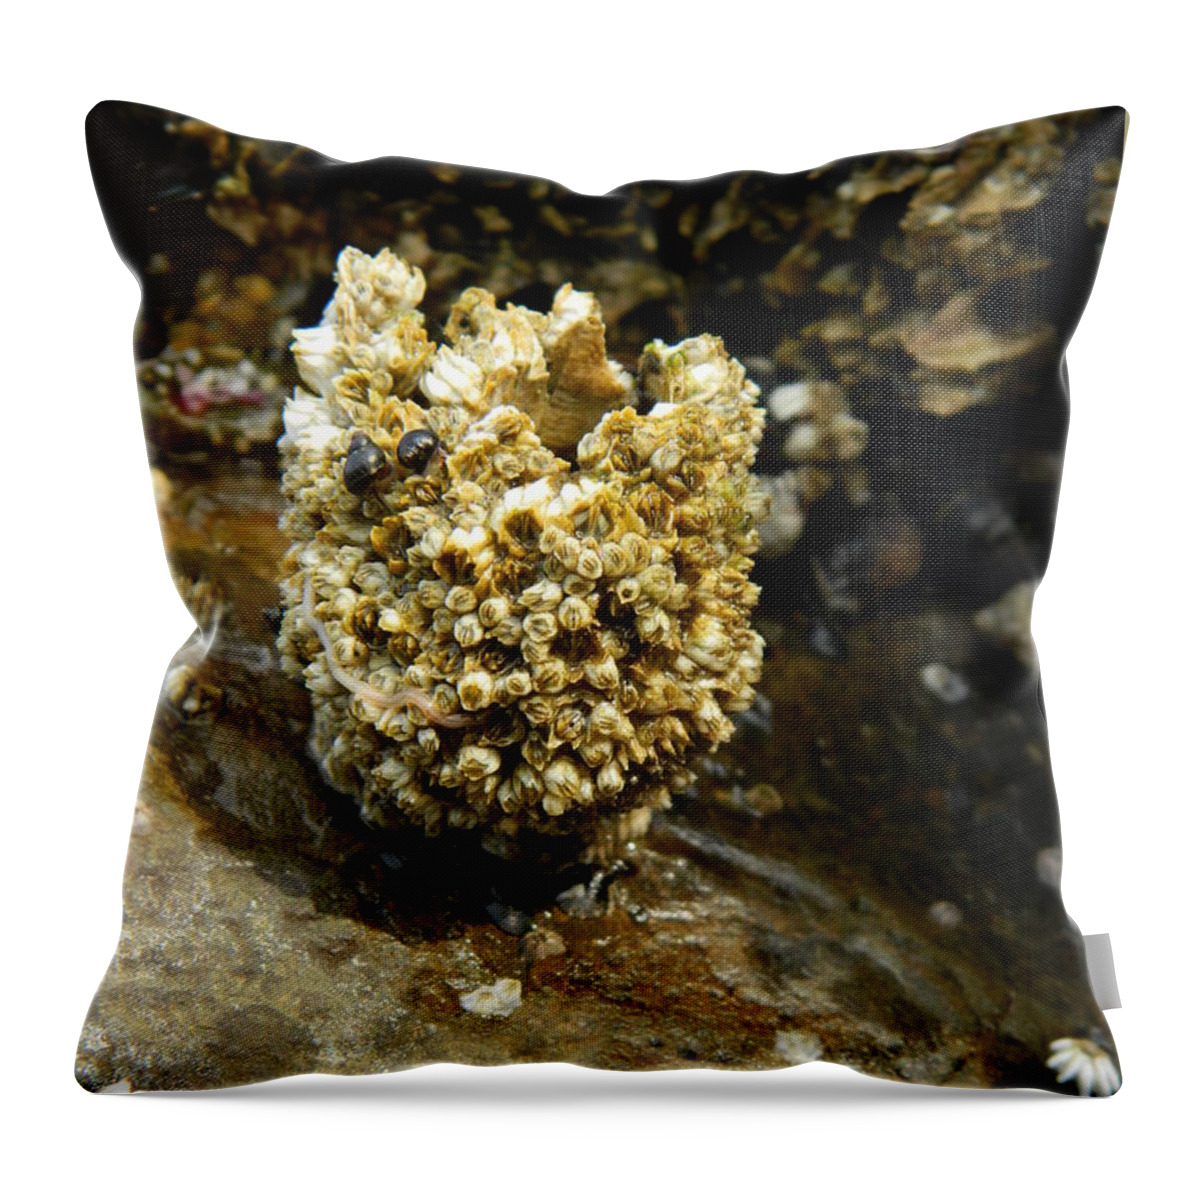 Barnacles Throw Pillow featuring the photograph Barnacle Worm by Gallery Of Hope 